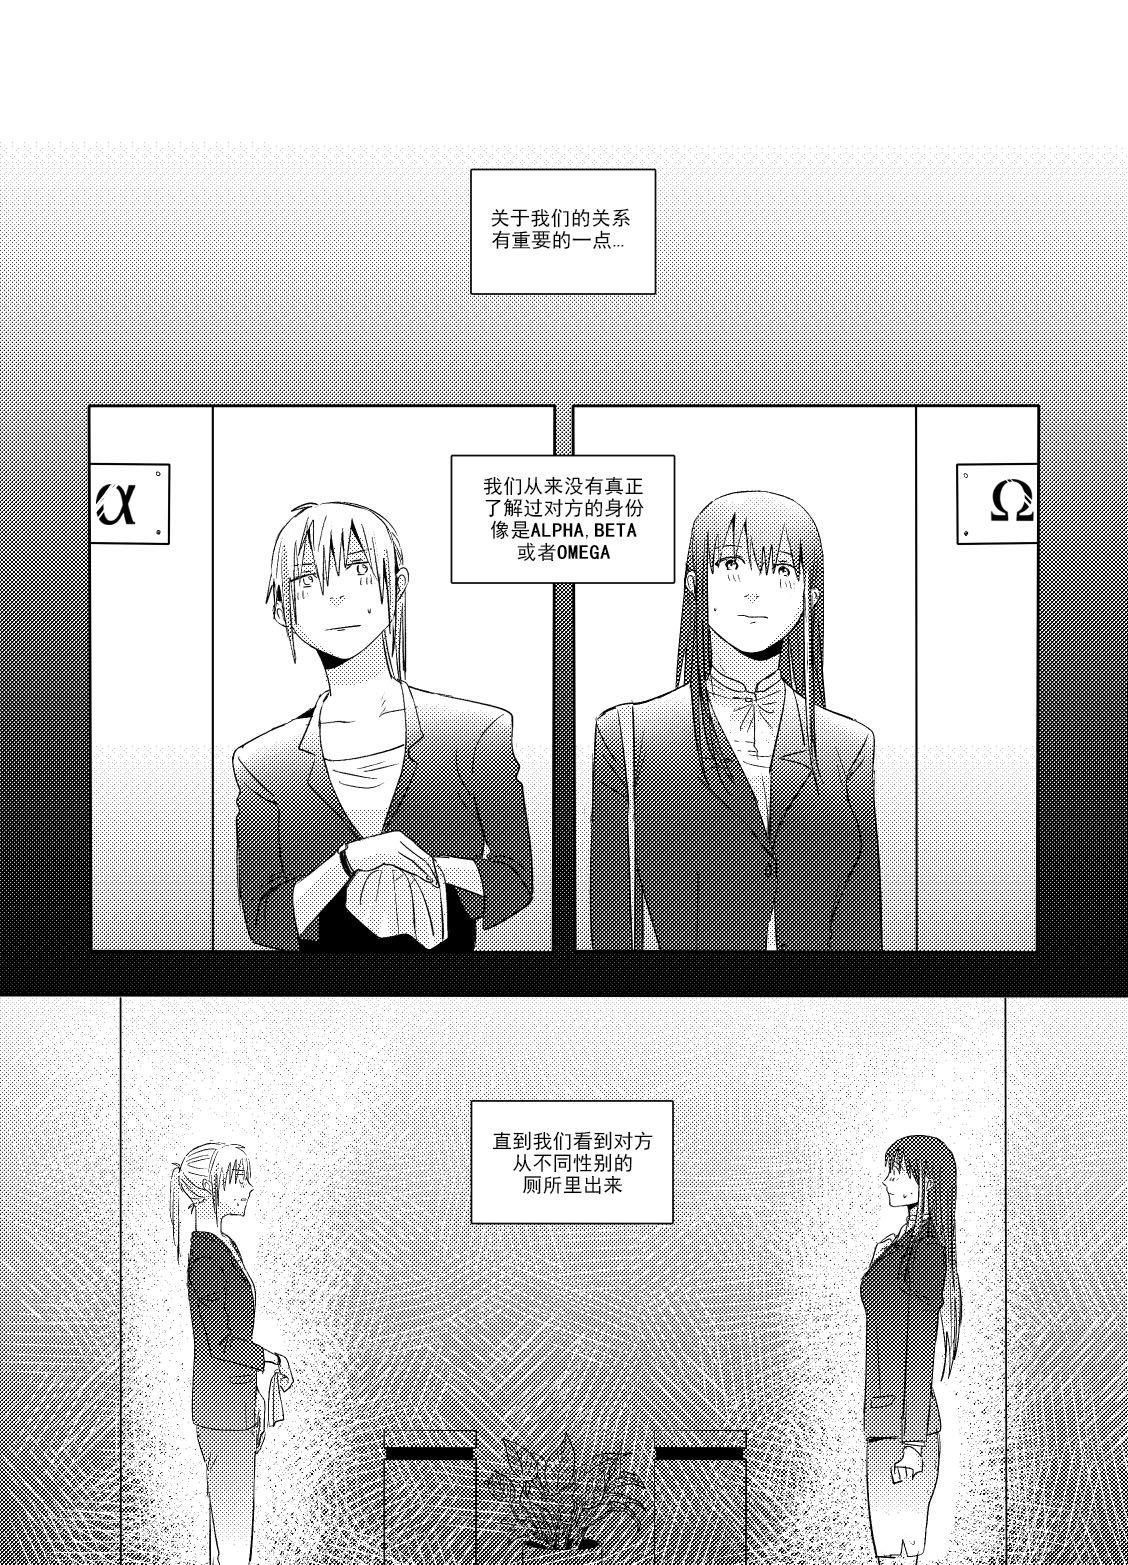 No Condom Alpha's trouble with Omega in heat part.1 - Girls frontline Glasses - Page 6